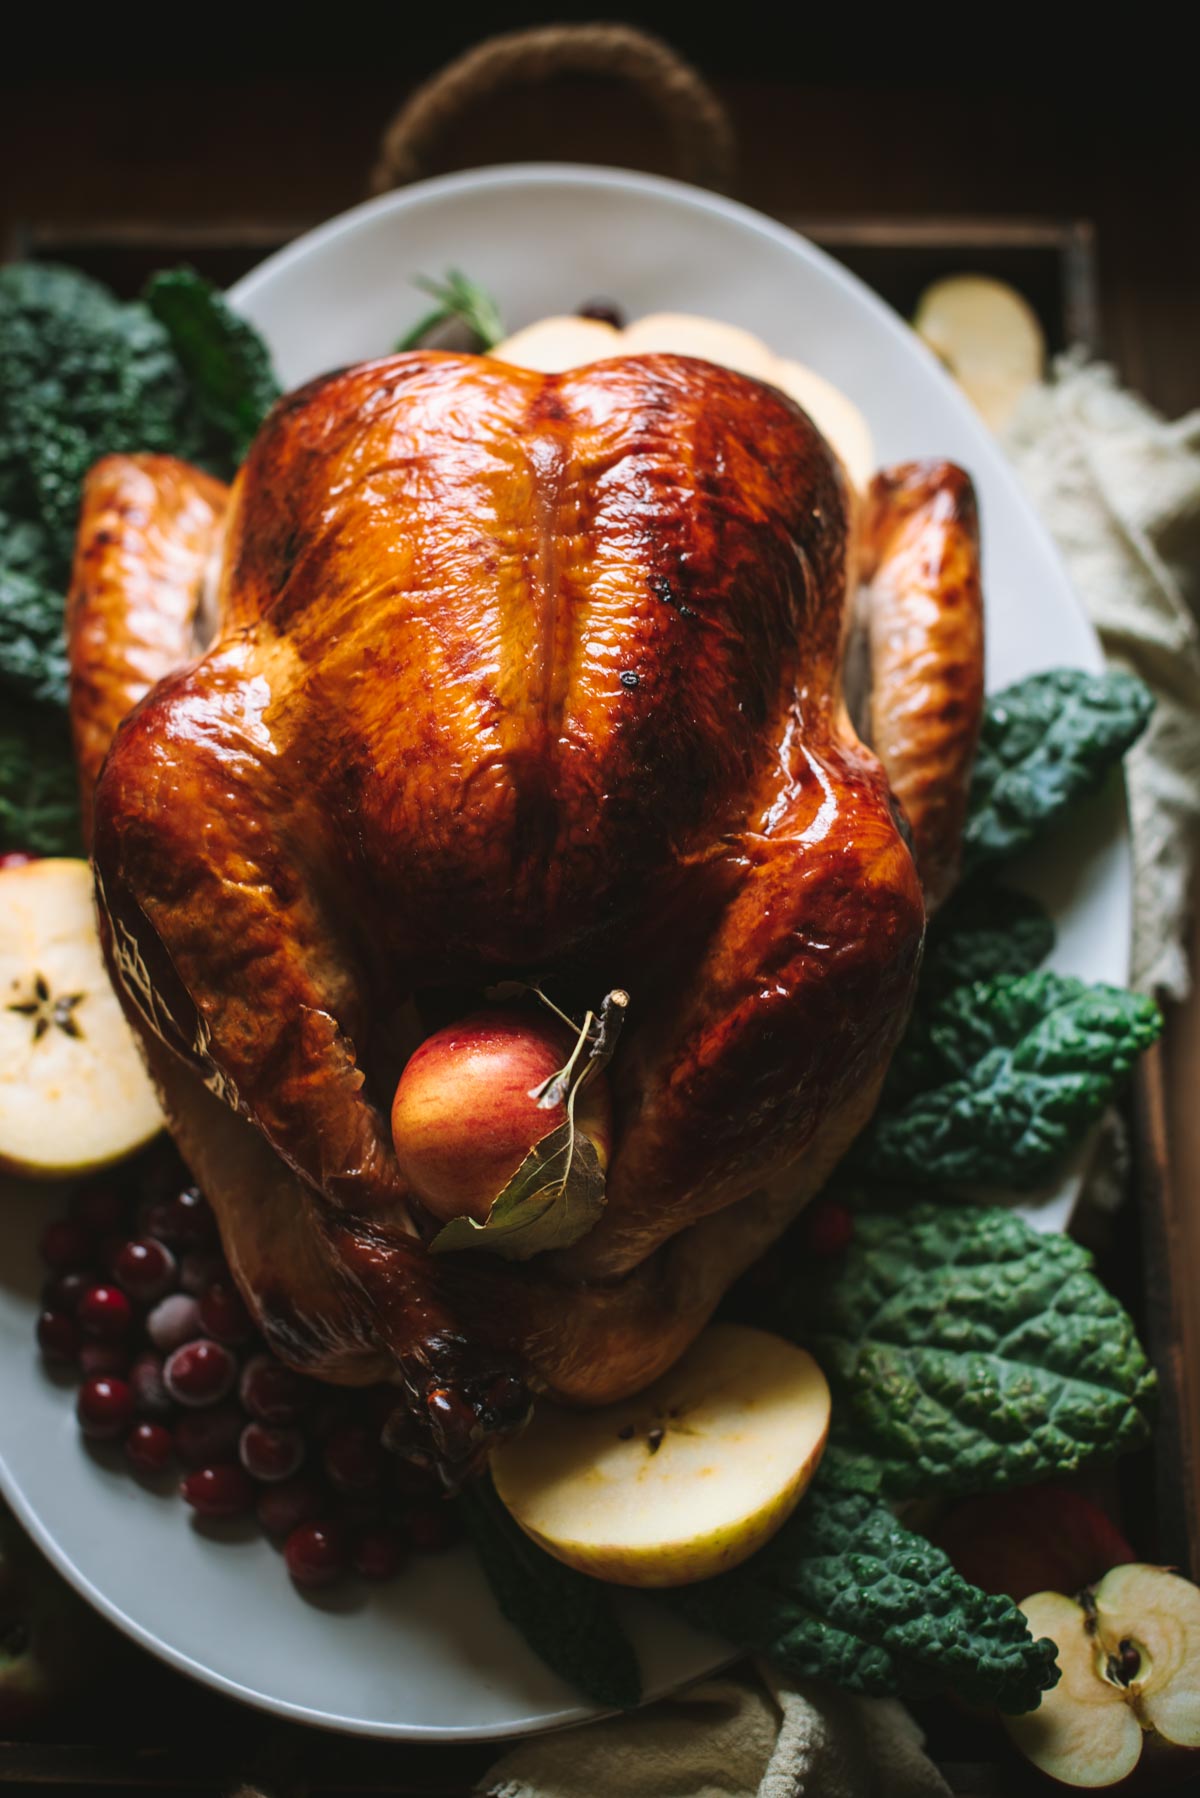 Close up of crispy baked turkey. It has been brined in apple cider and placed on a white serving platter. It has been decorated with salad leaves underneath and slices of apple scattered around, There is also a full apple sitting where the legs cross.